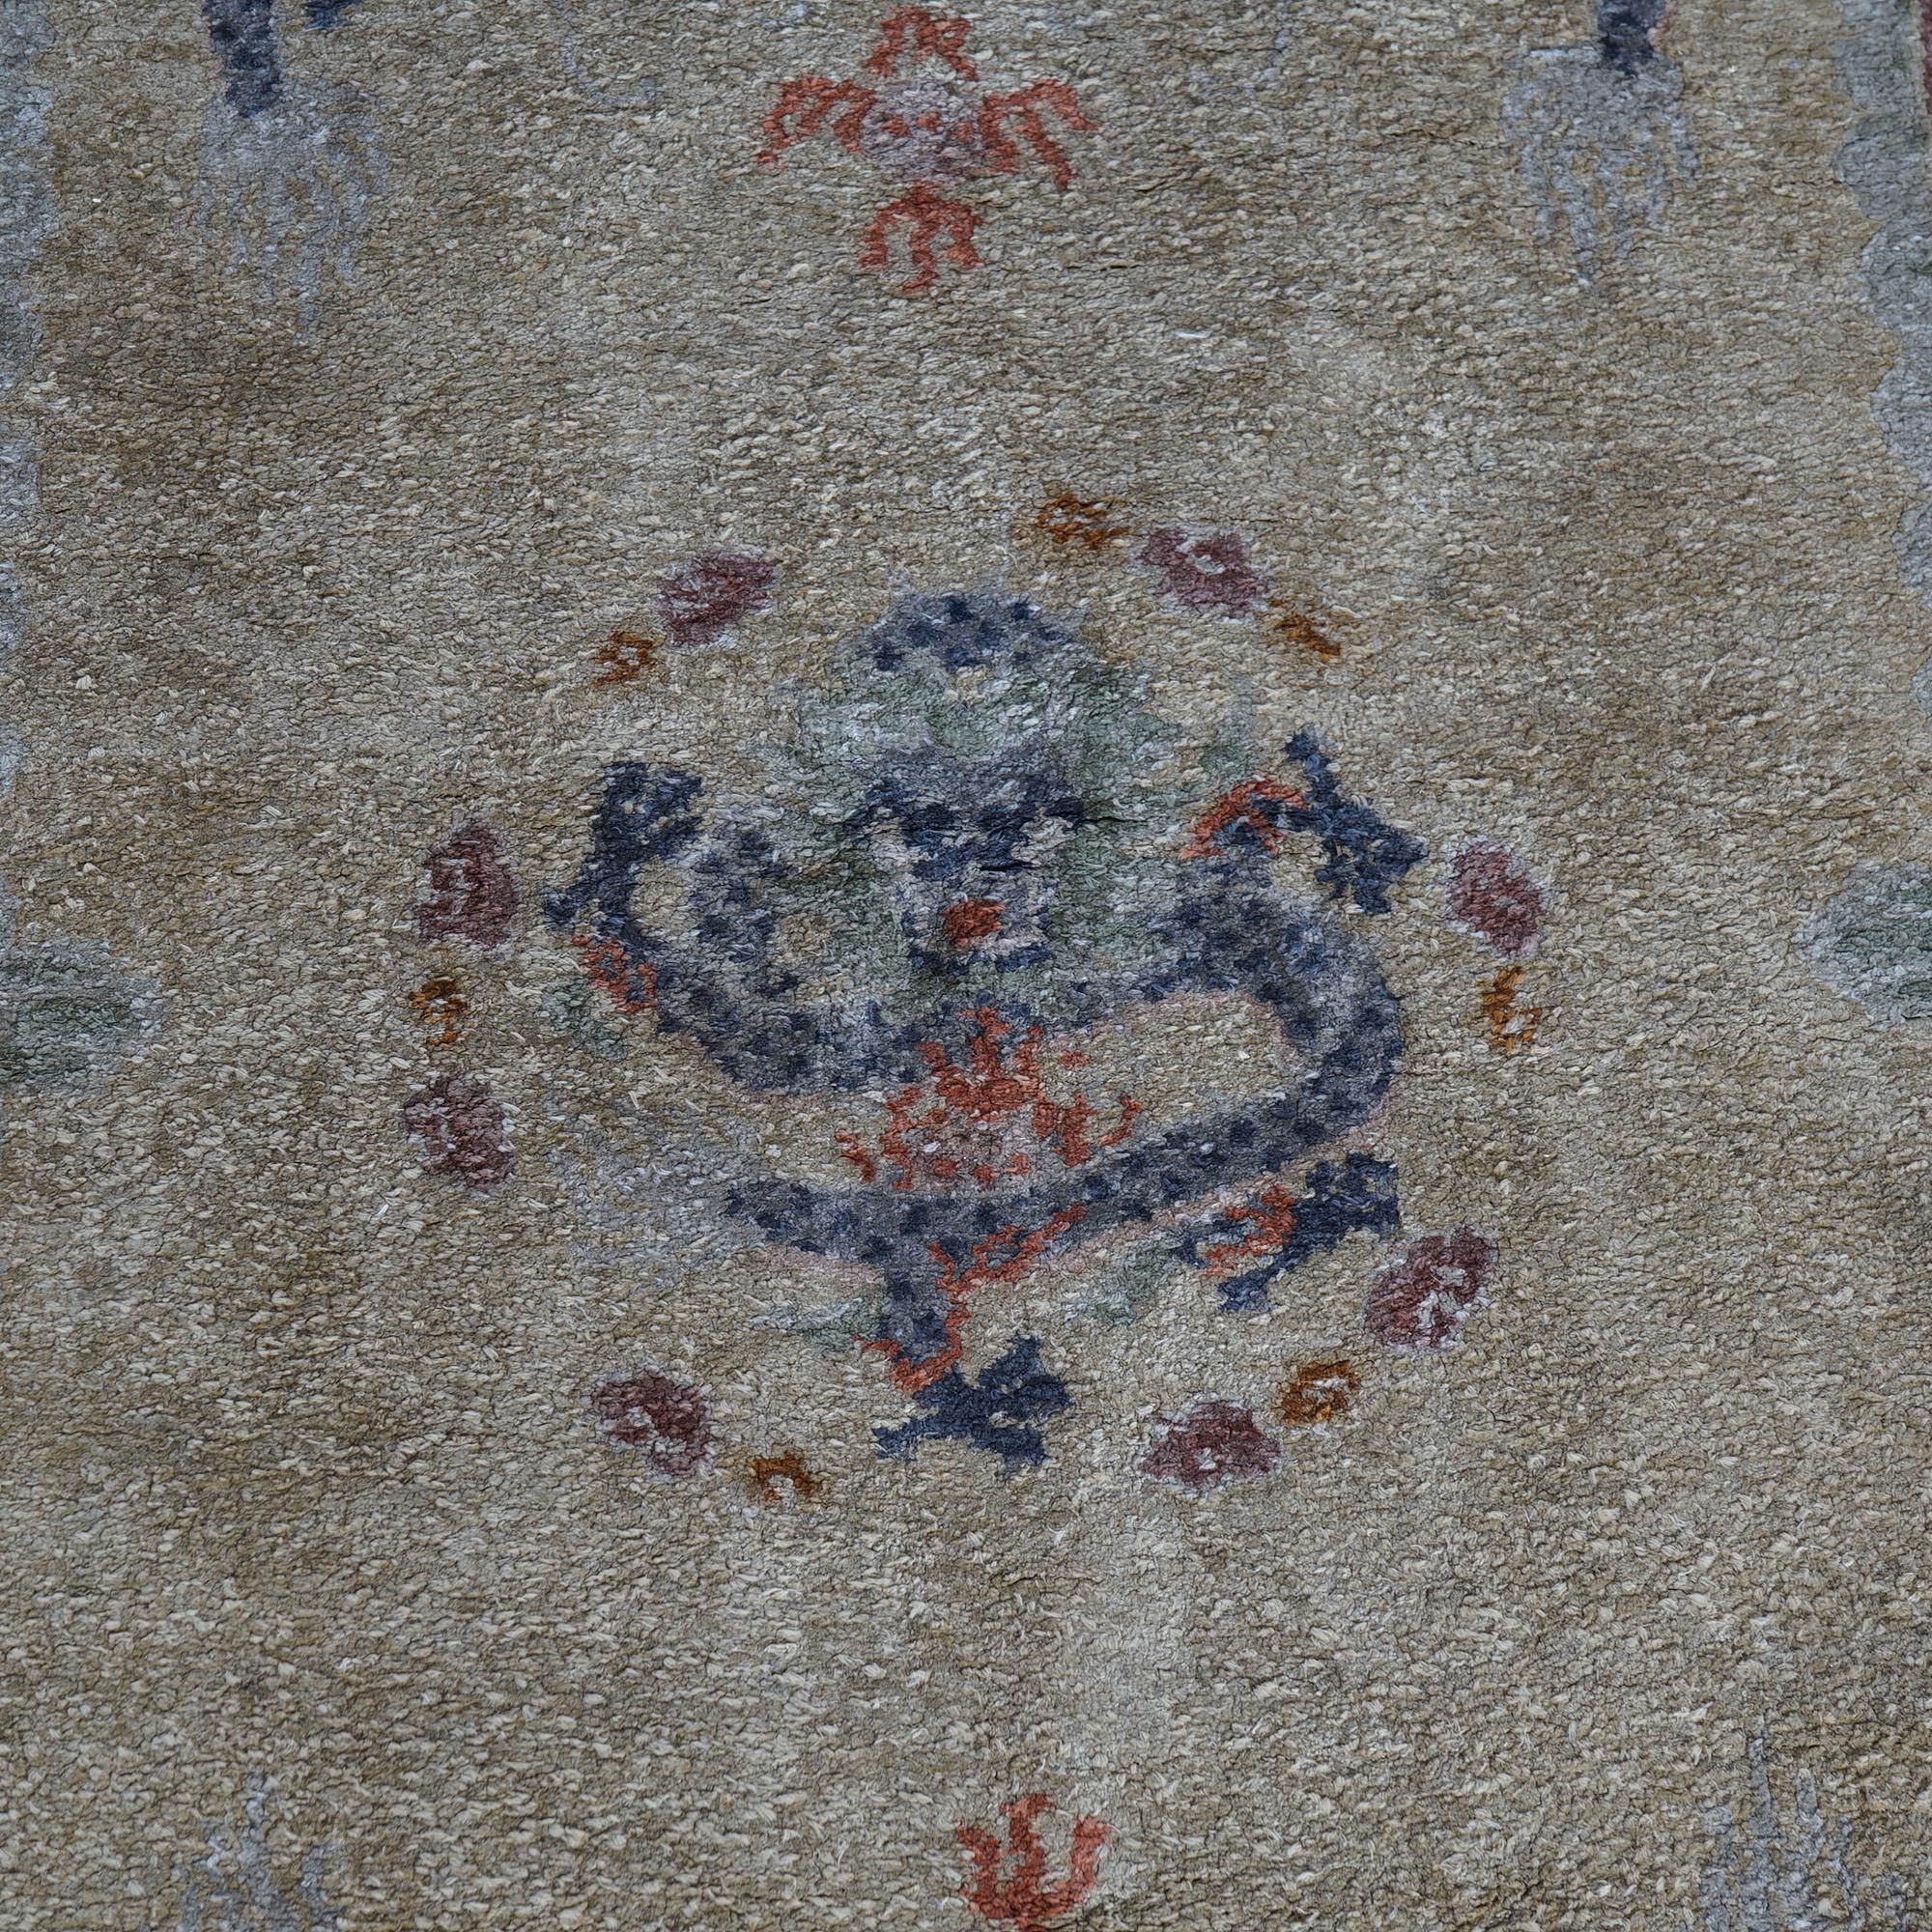 Antique Silk Chinese Oriental Rug with Dragons & Symbols Circa 1920 For Sale 4